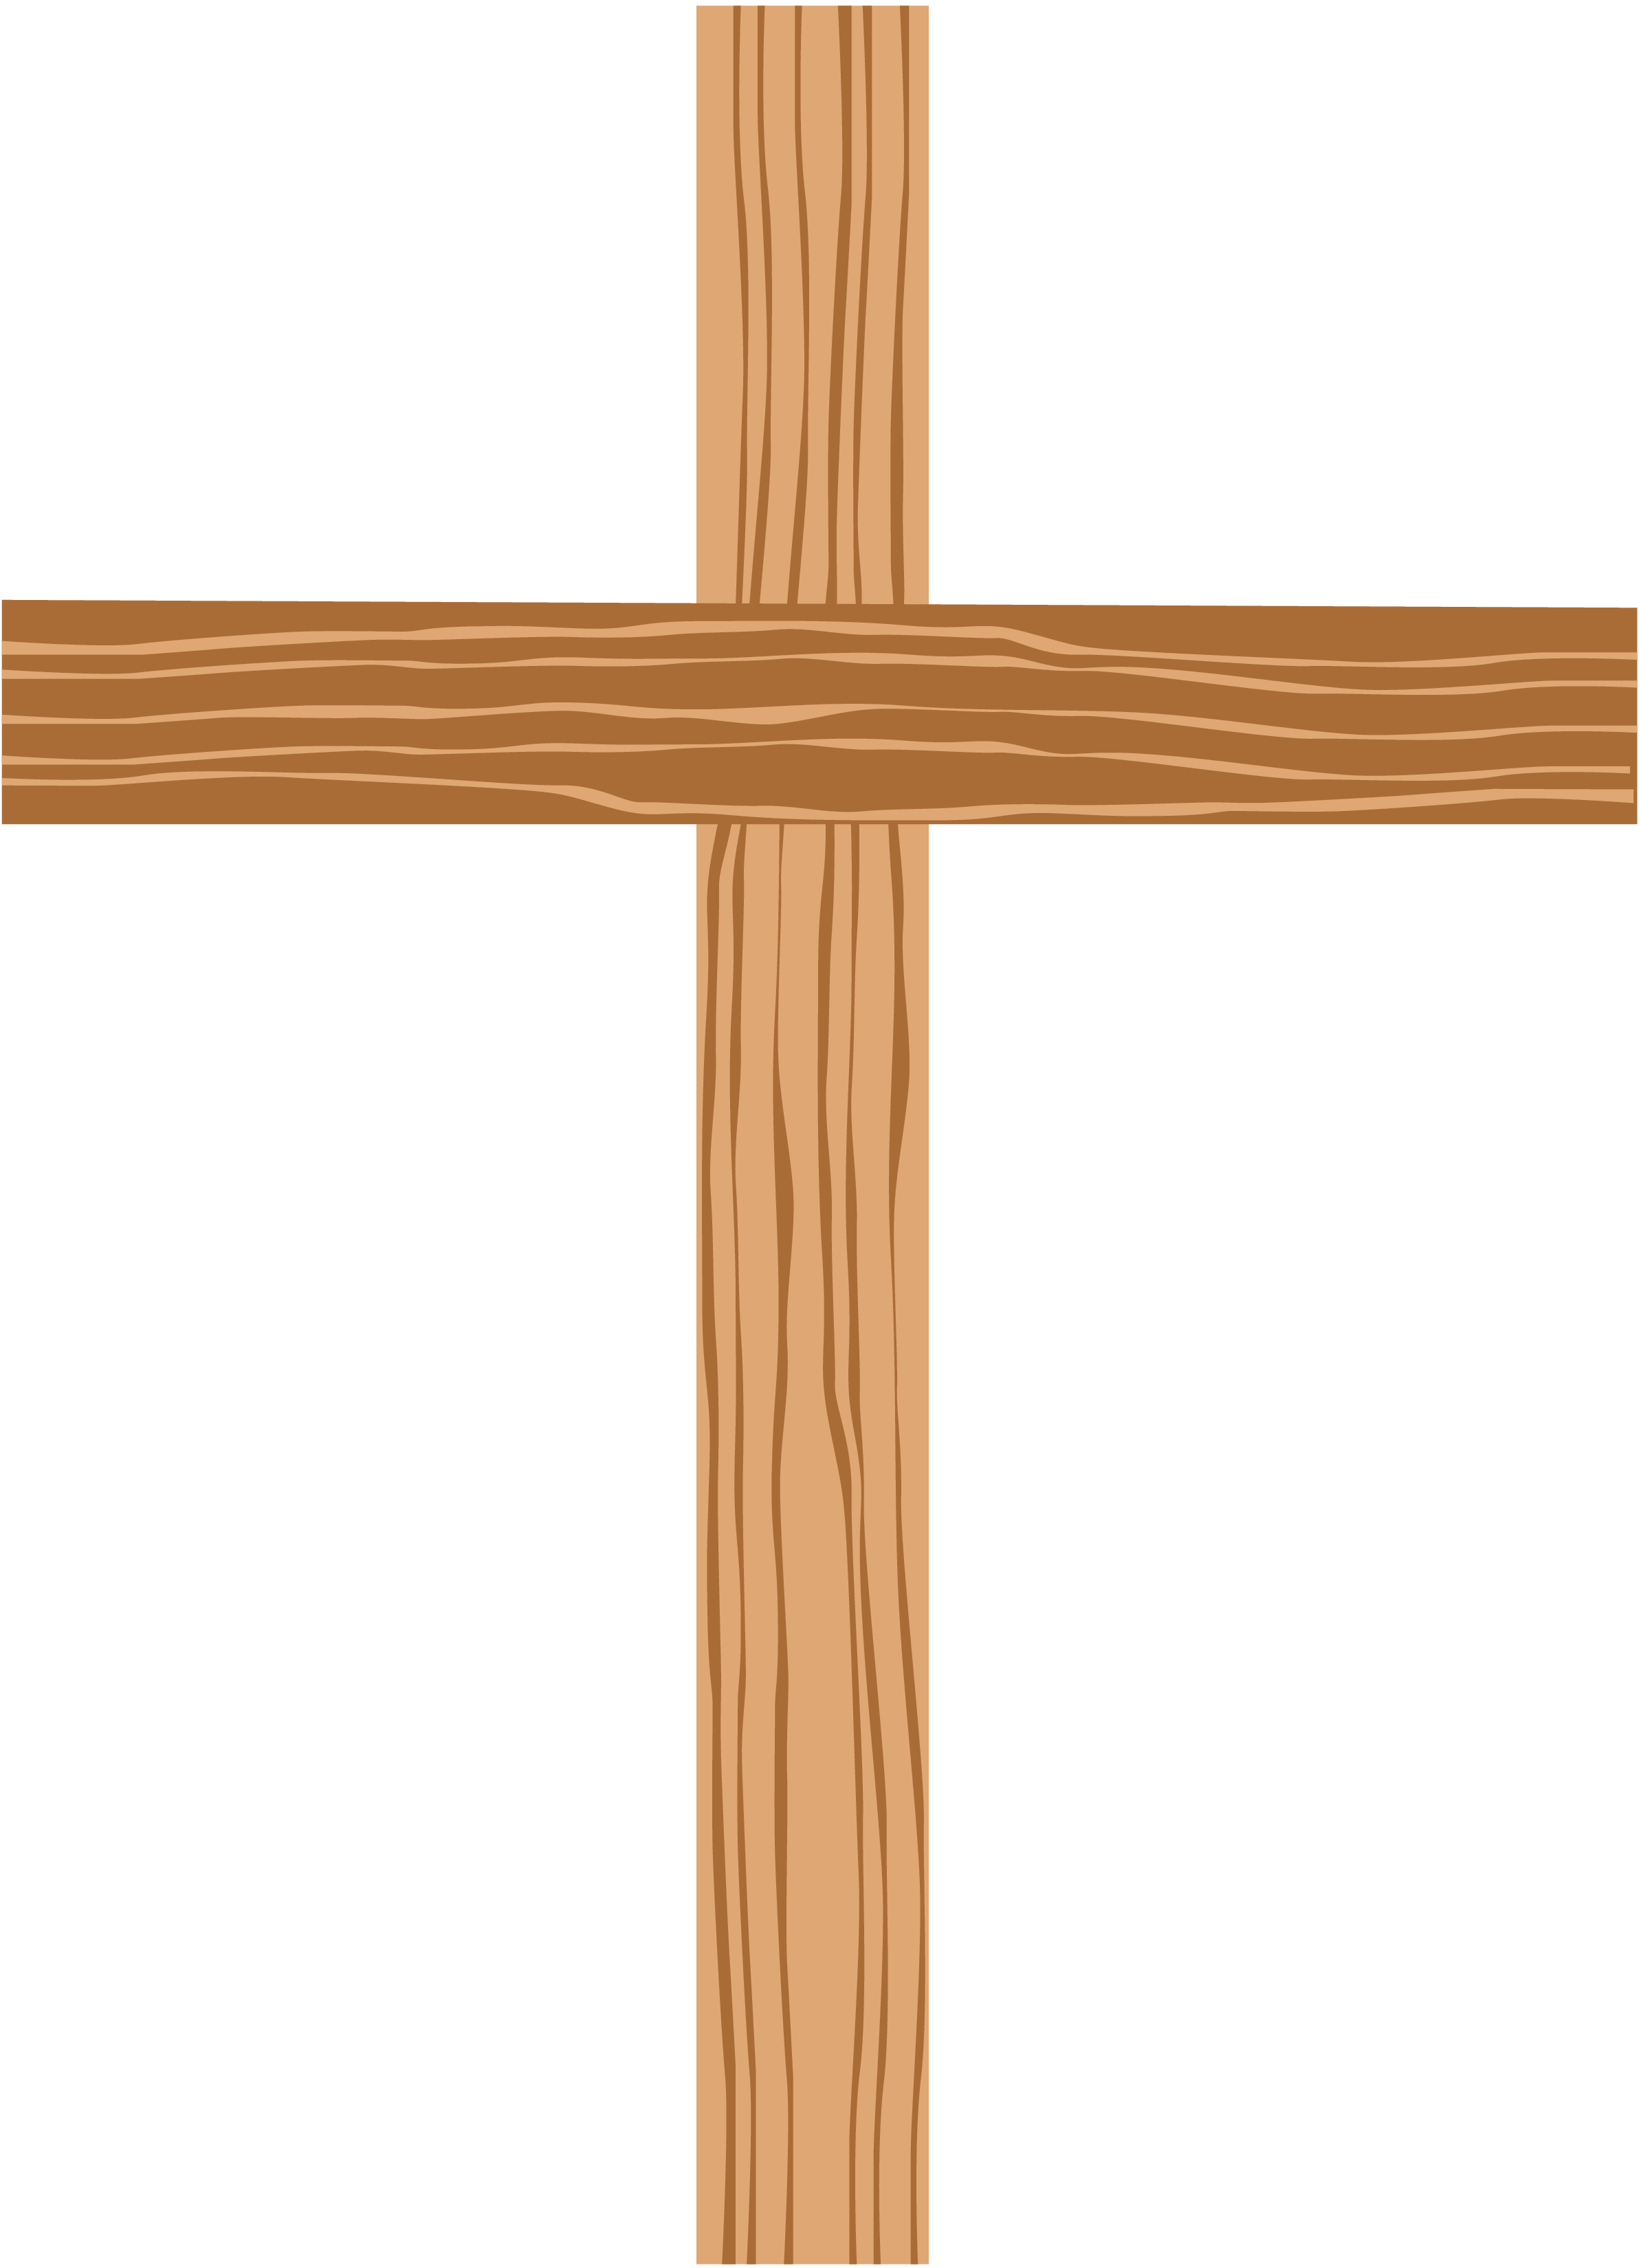 Wood Cross Free Cliparts That You Can Download To You Computer And